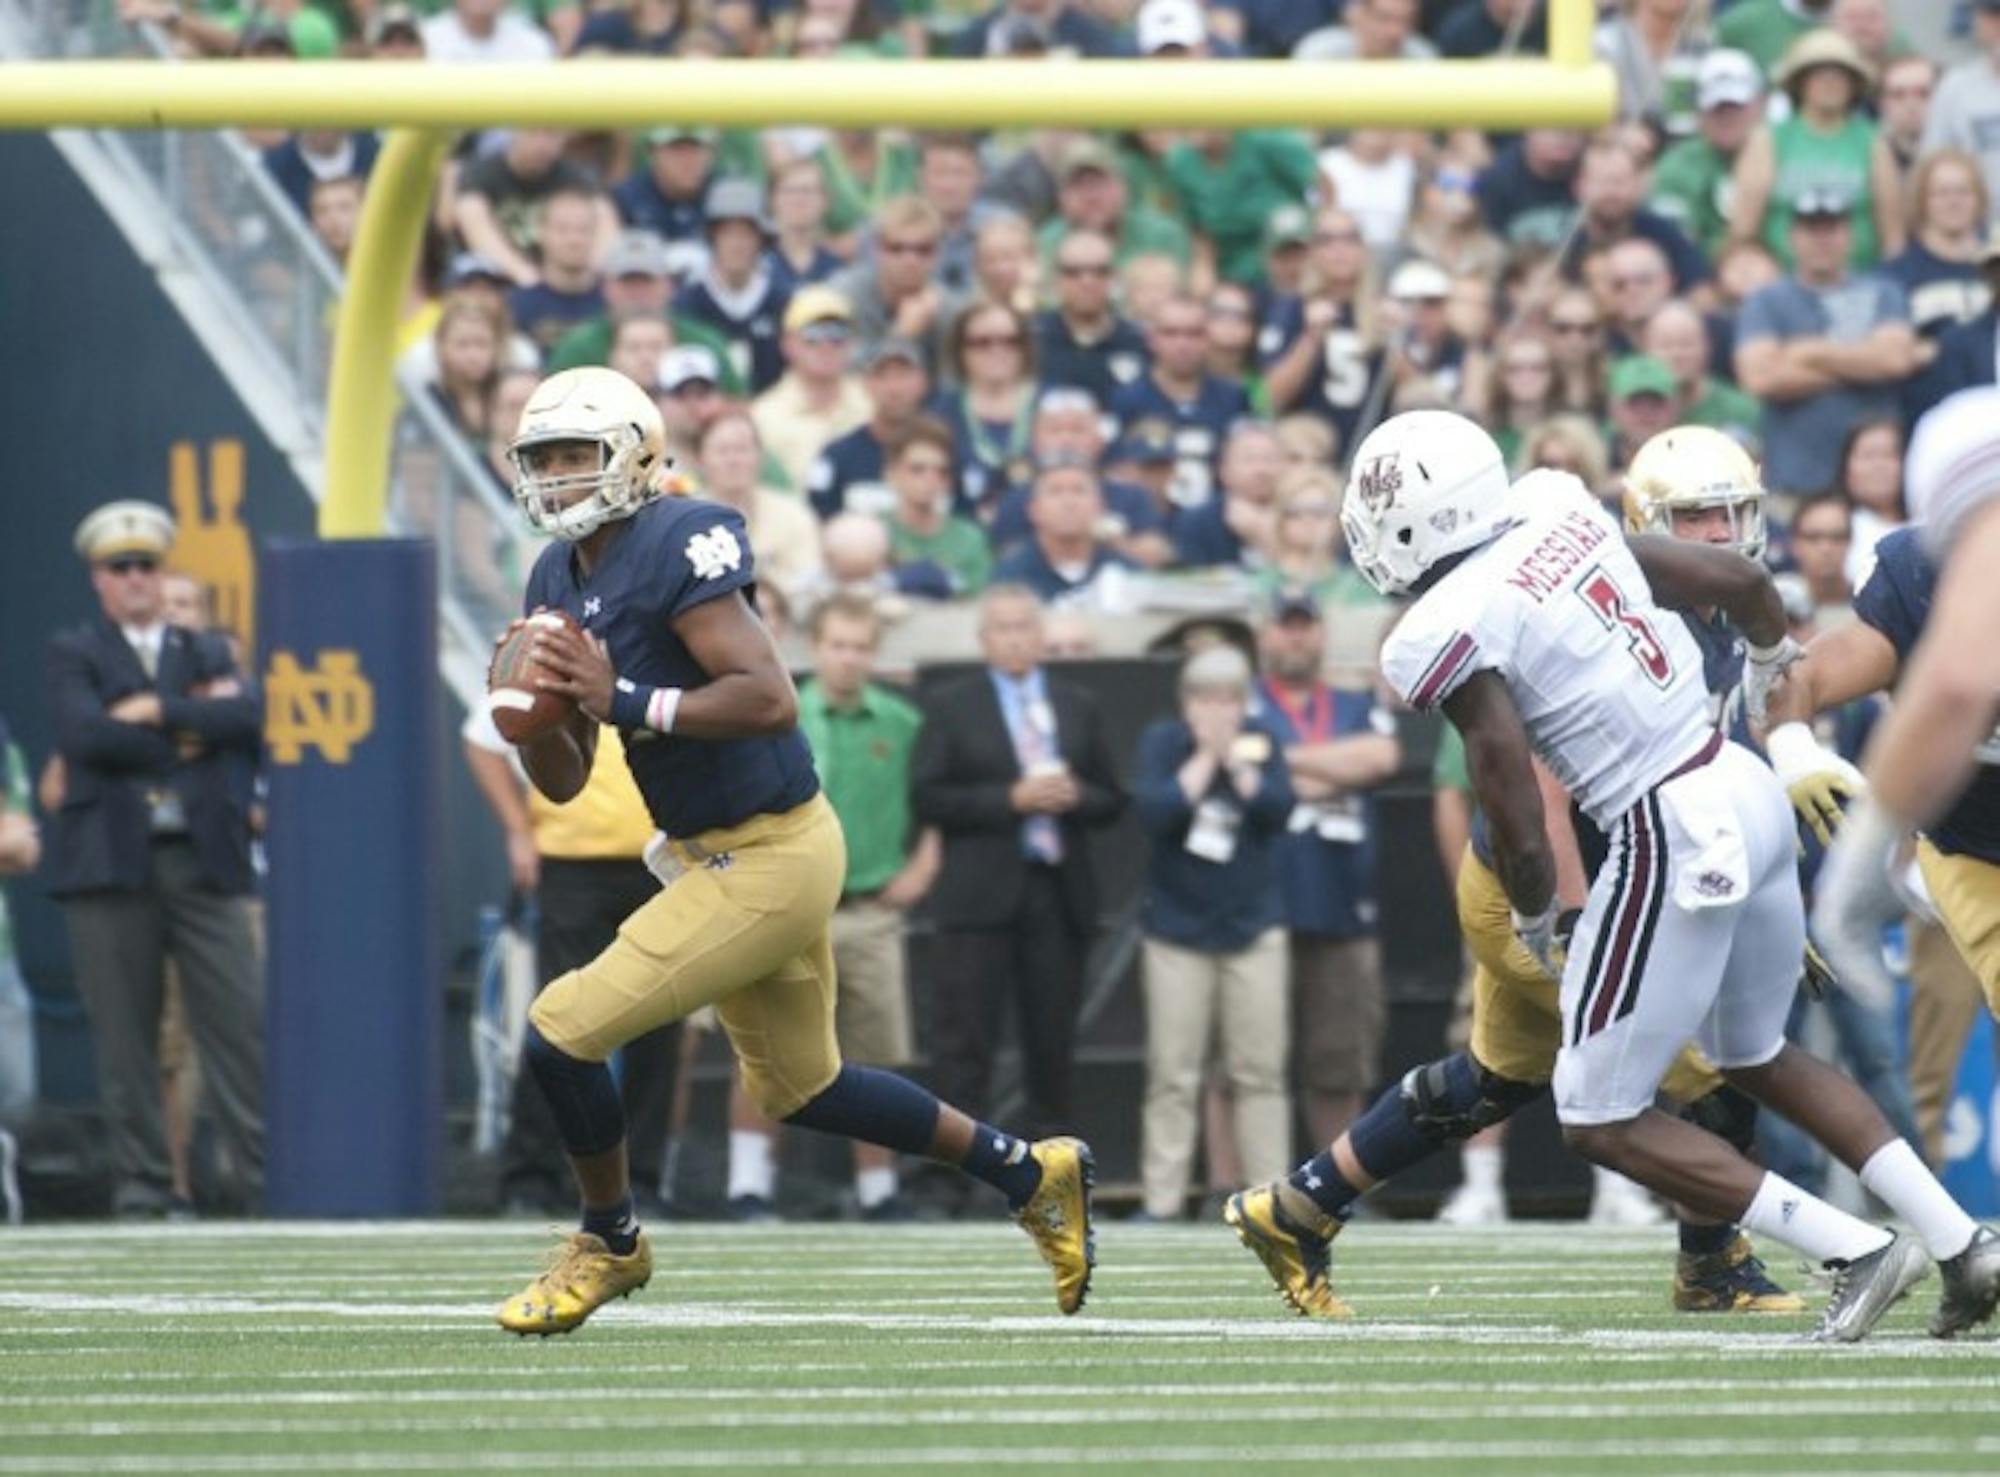 Irish freshman quarterback Brandon Wimbush rolls out to pass during his Notre Dame debut Saturday. Wimbush ran for a touchdown, the first in his Irish career, and had a deep pass to junior receiver Will Fuller, his first attempt, ruled incomplete after a video review. Wimbush also had a would-be touchdown pass called back due to an Irish penalty.